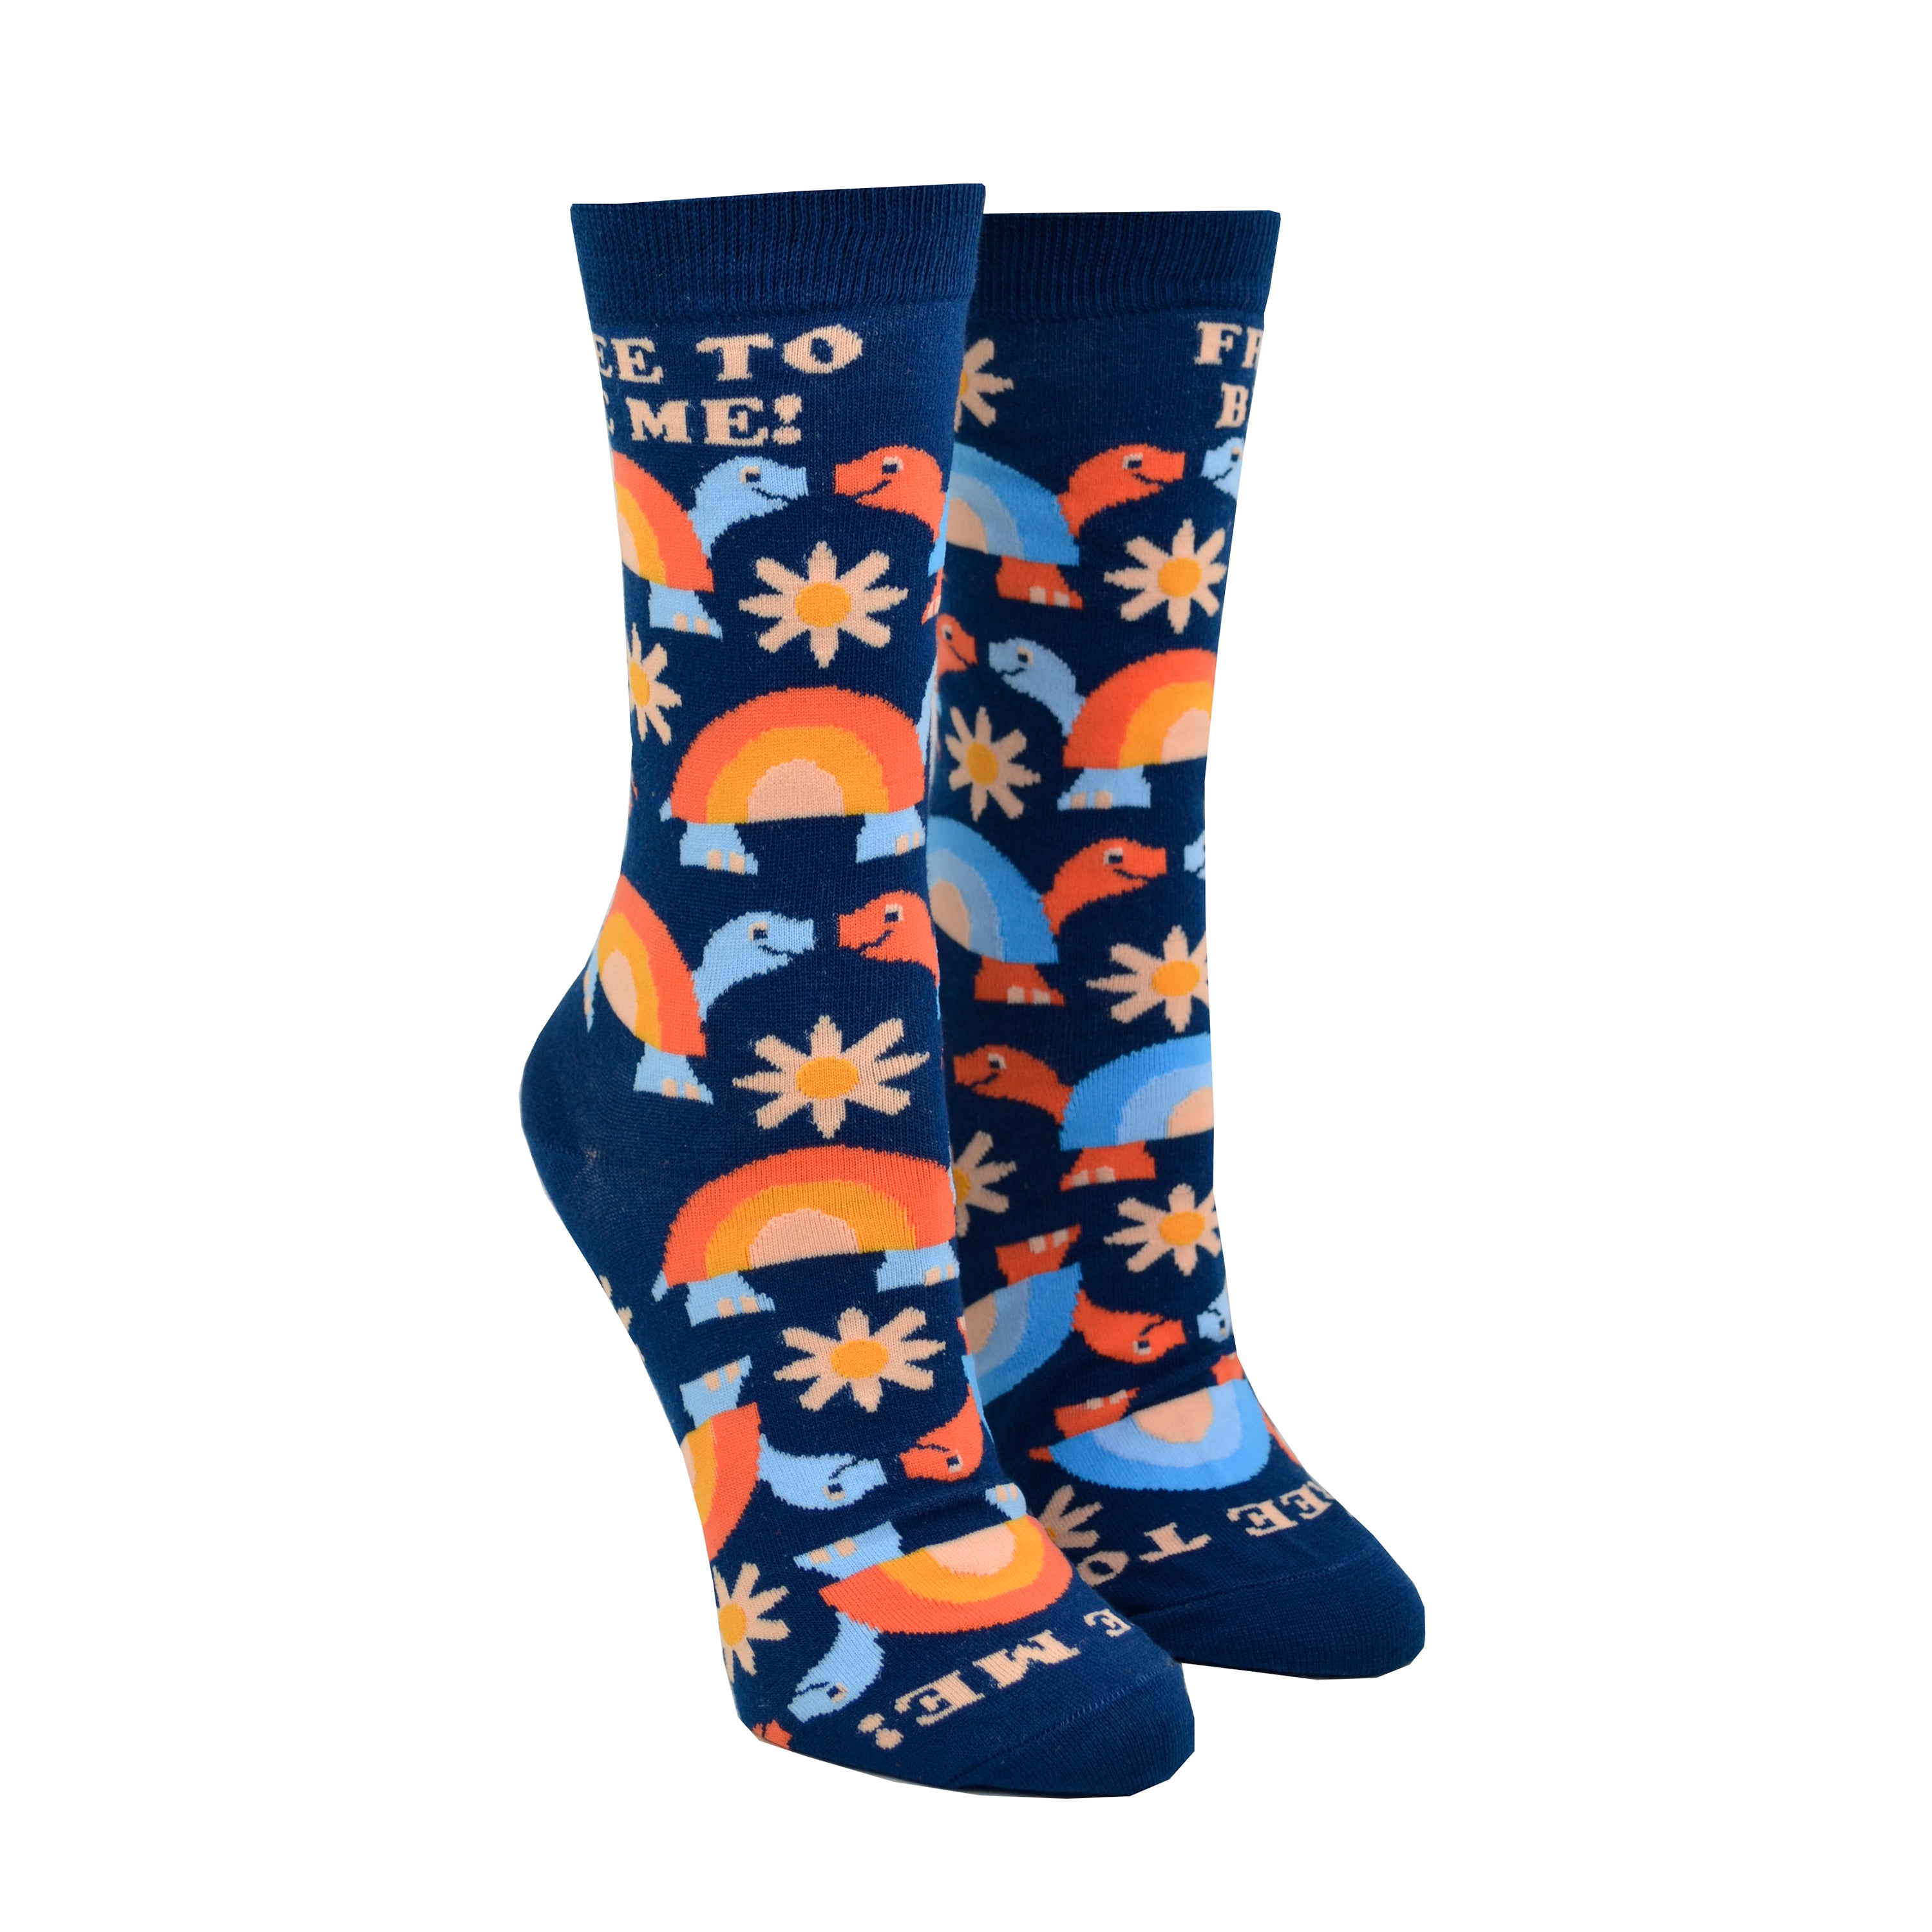 Shown on leg forms, a pair of women's Yellow Owl Workshop brand cotton and nylon socks in navy blue with orange and blue rainbow shelled turtles and orange daisies and the words 